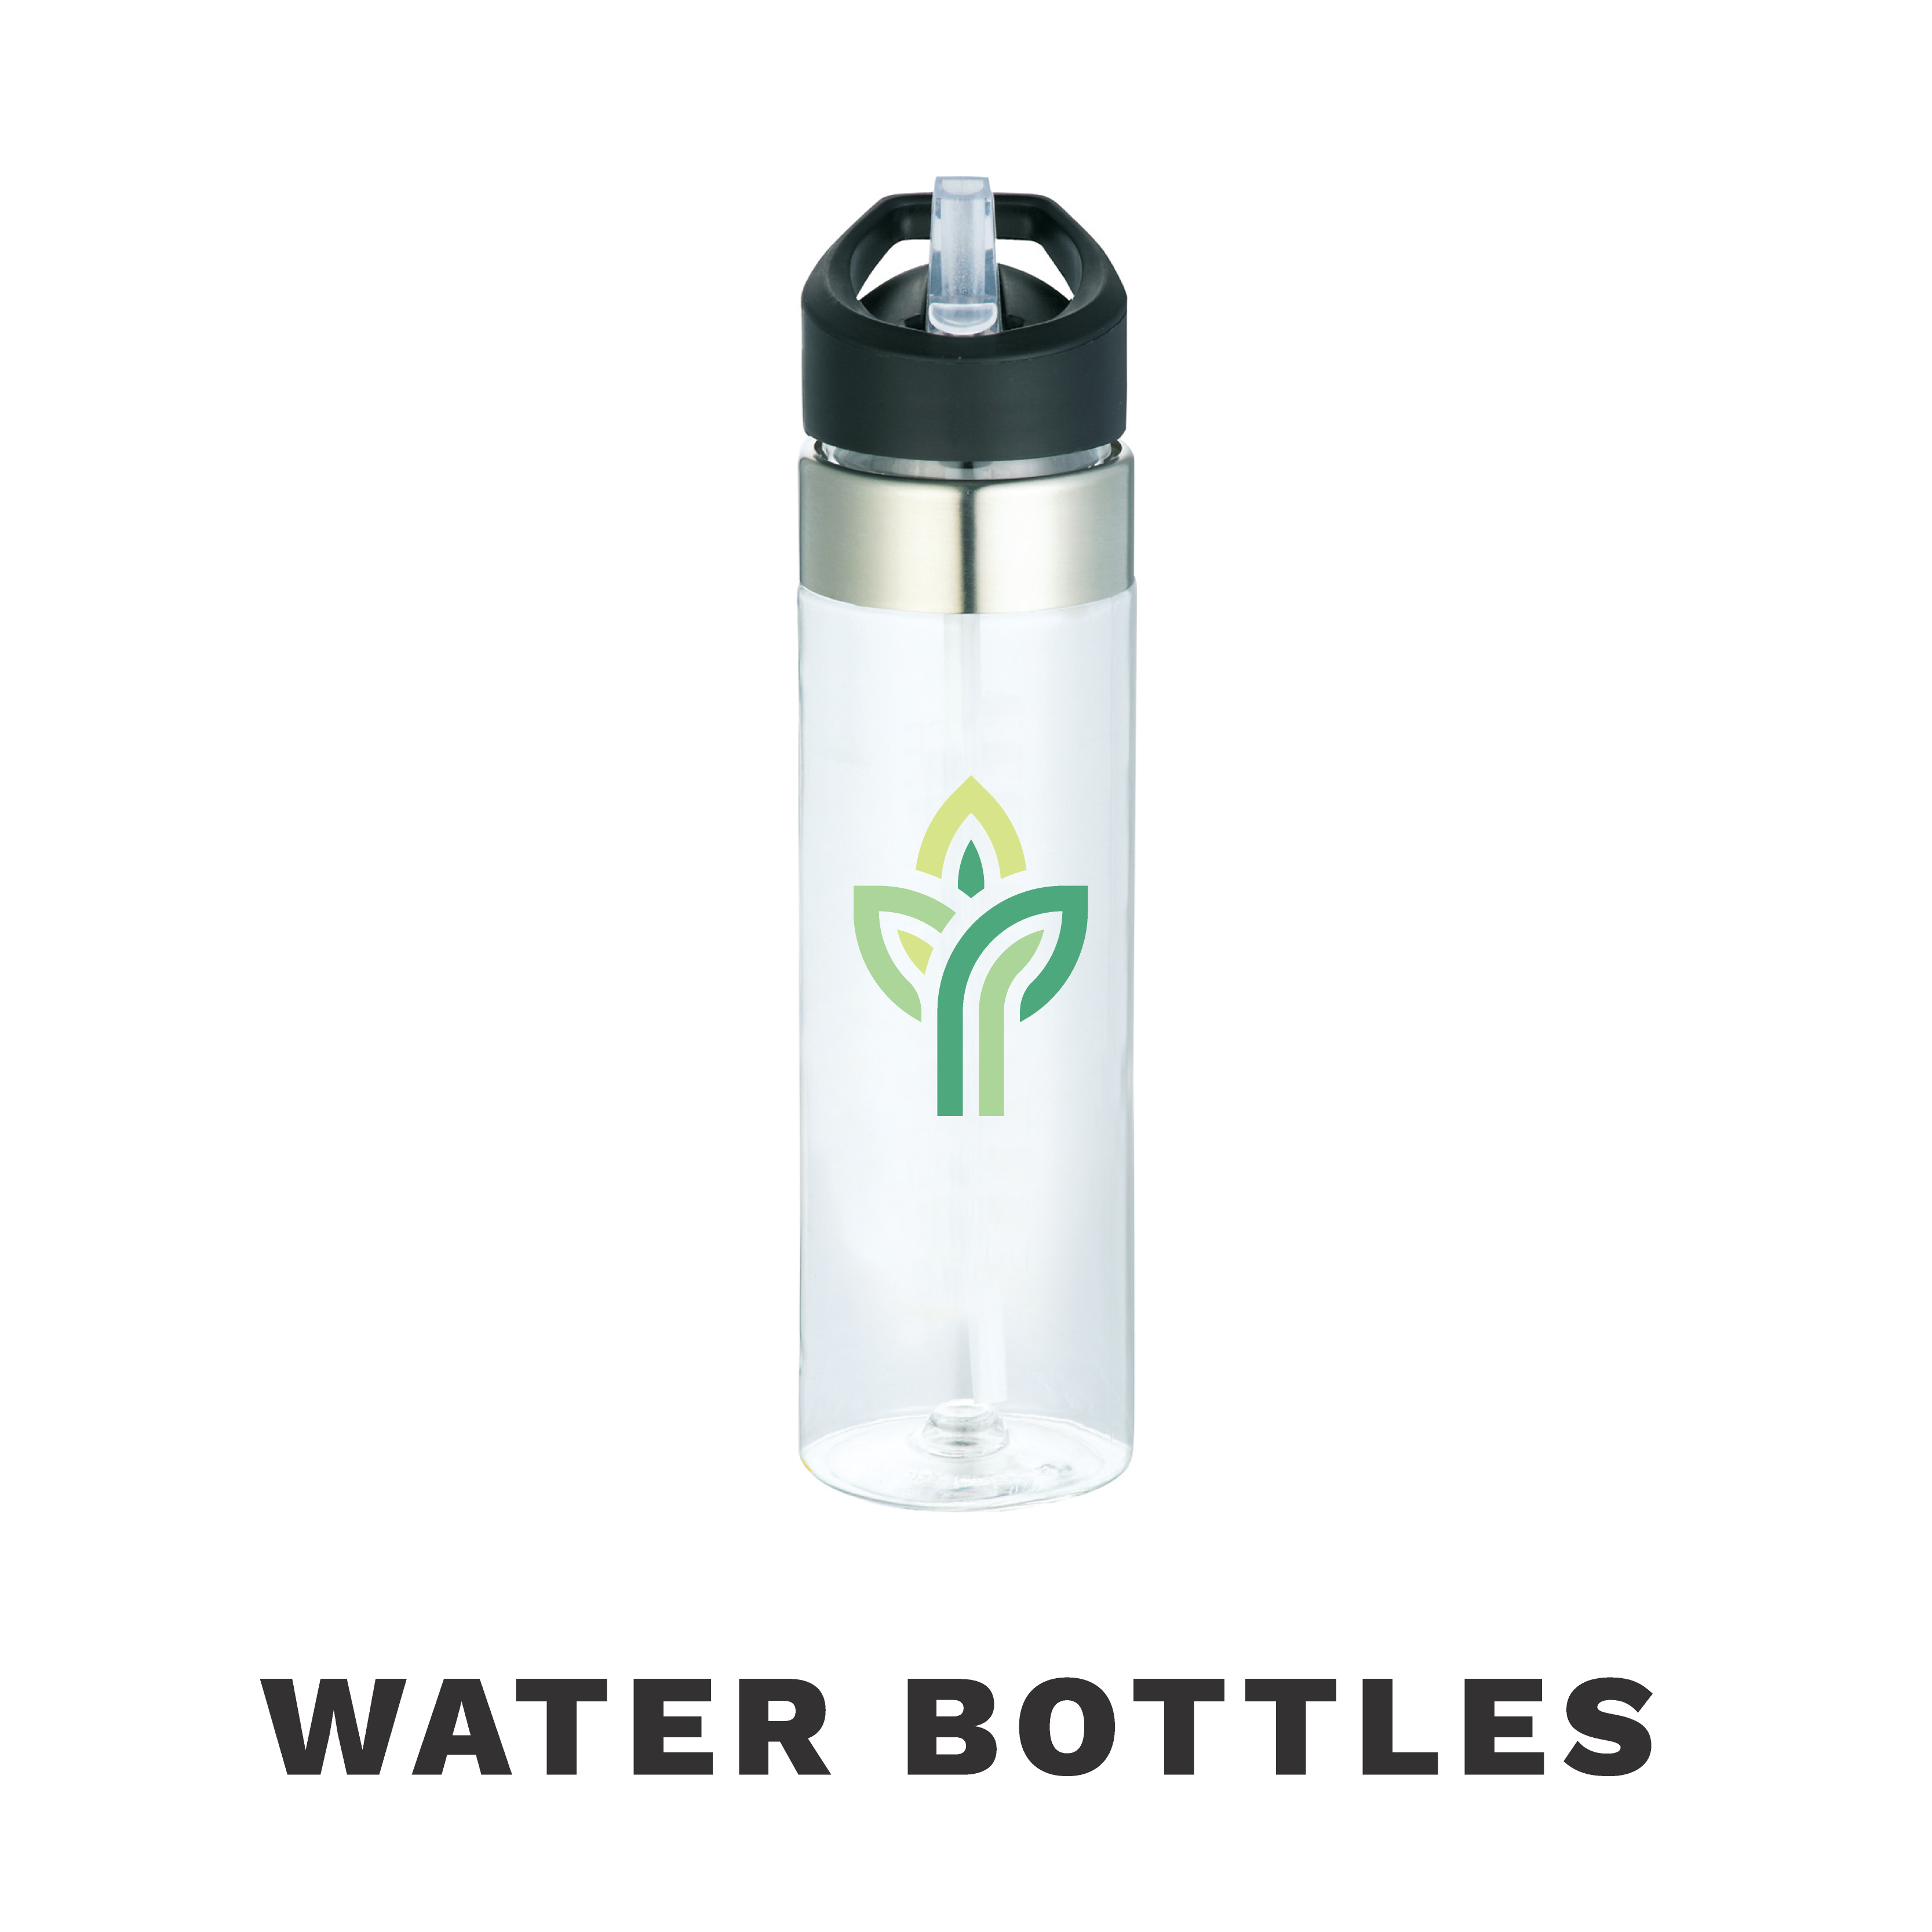 Your brand water bottle